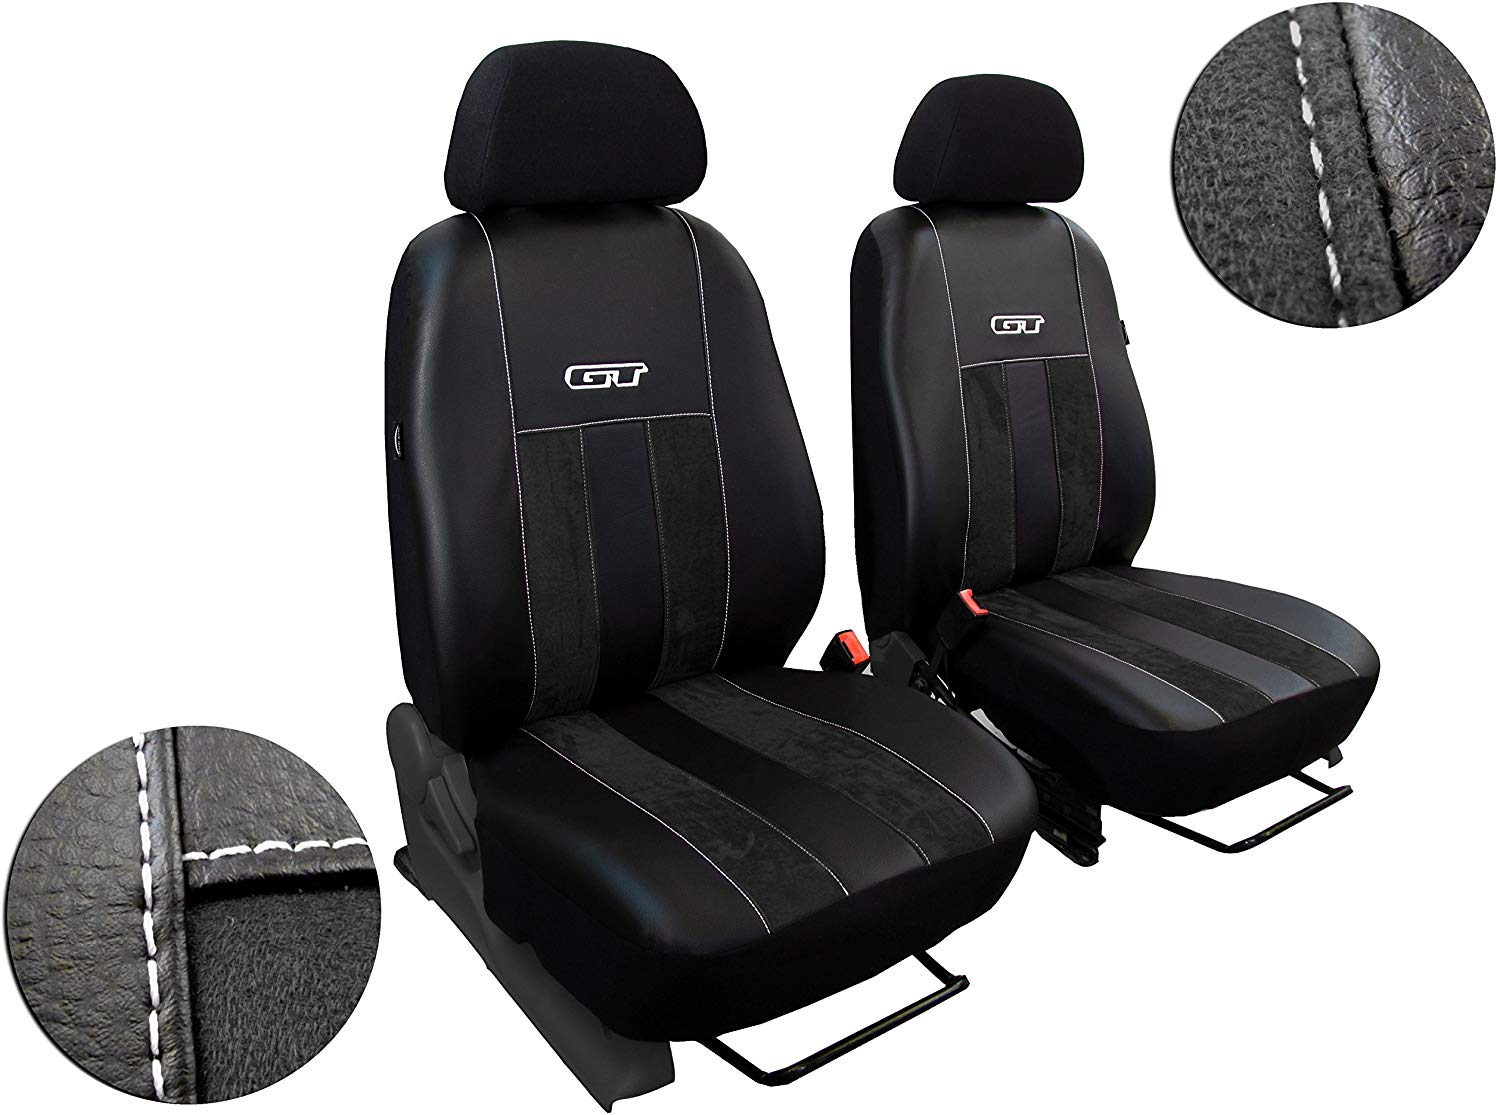 Front Seat Covers Custom Seat Covers/Bus Cover Vauxhall Vivaro II GT Synthetic Suede with Ecoleder.. Includes 3 Colours Other Offers. (Black)